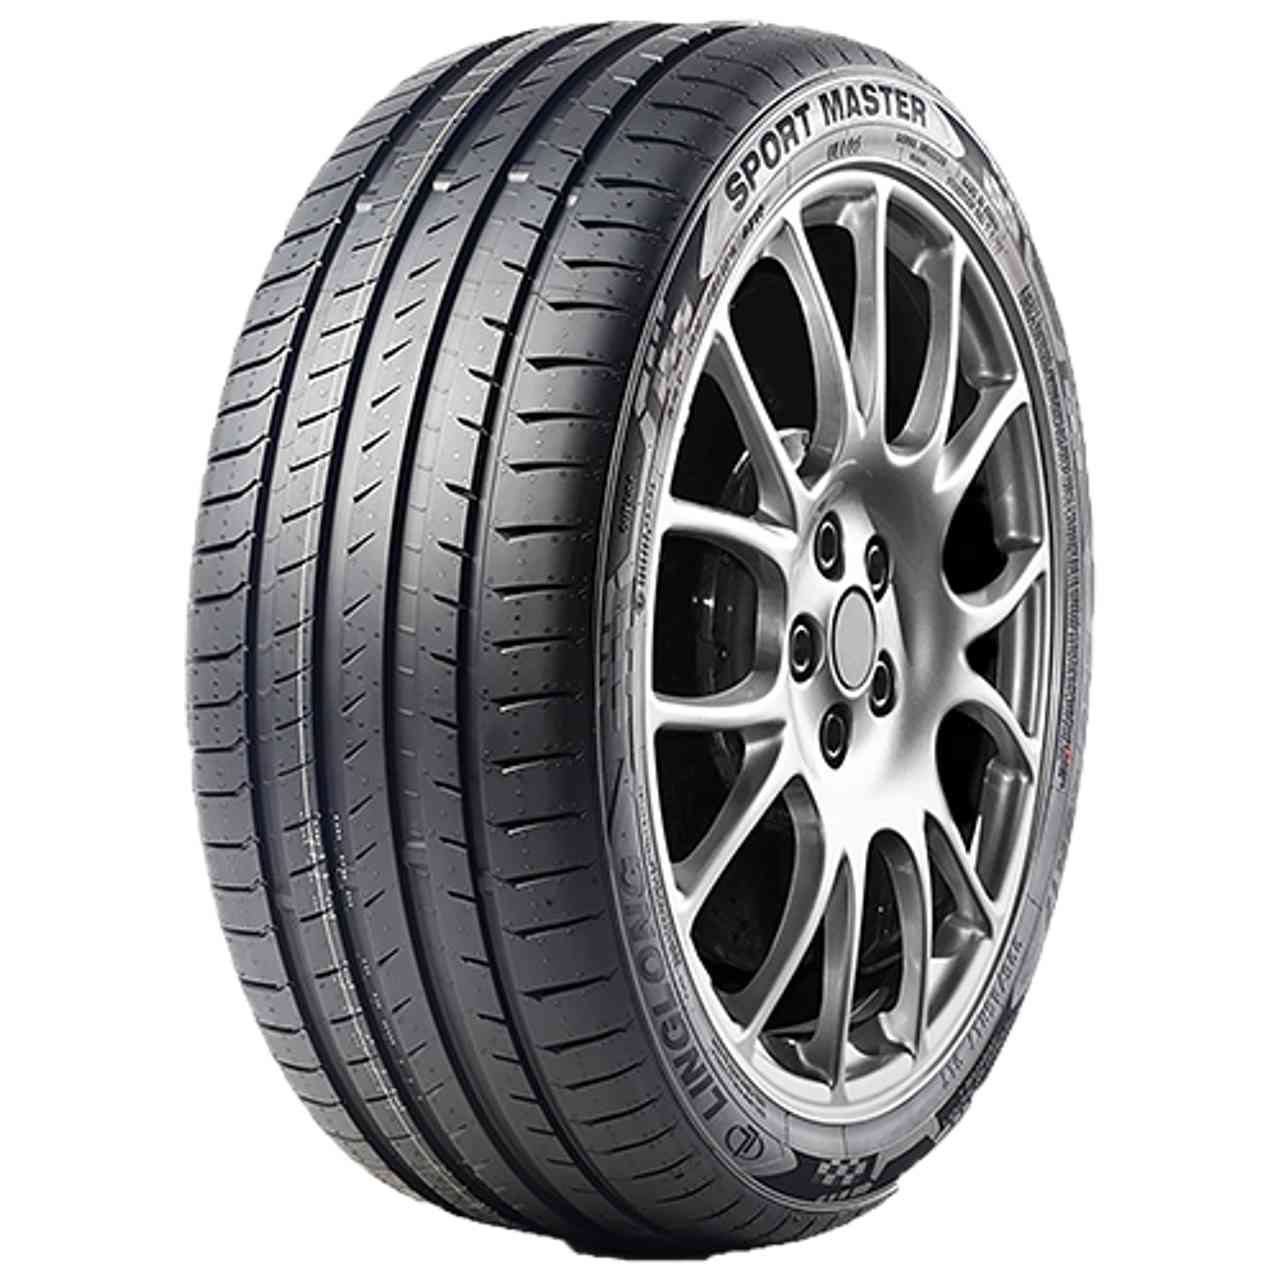 LINGLONG SPORT MASTER 225/55R19 103Y BSW